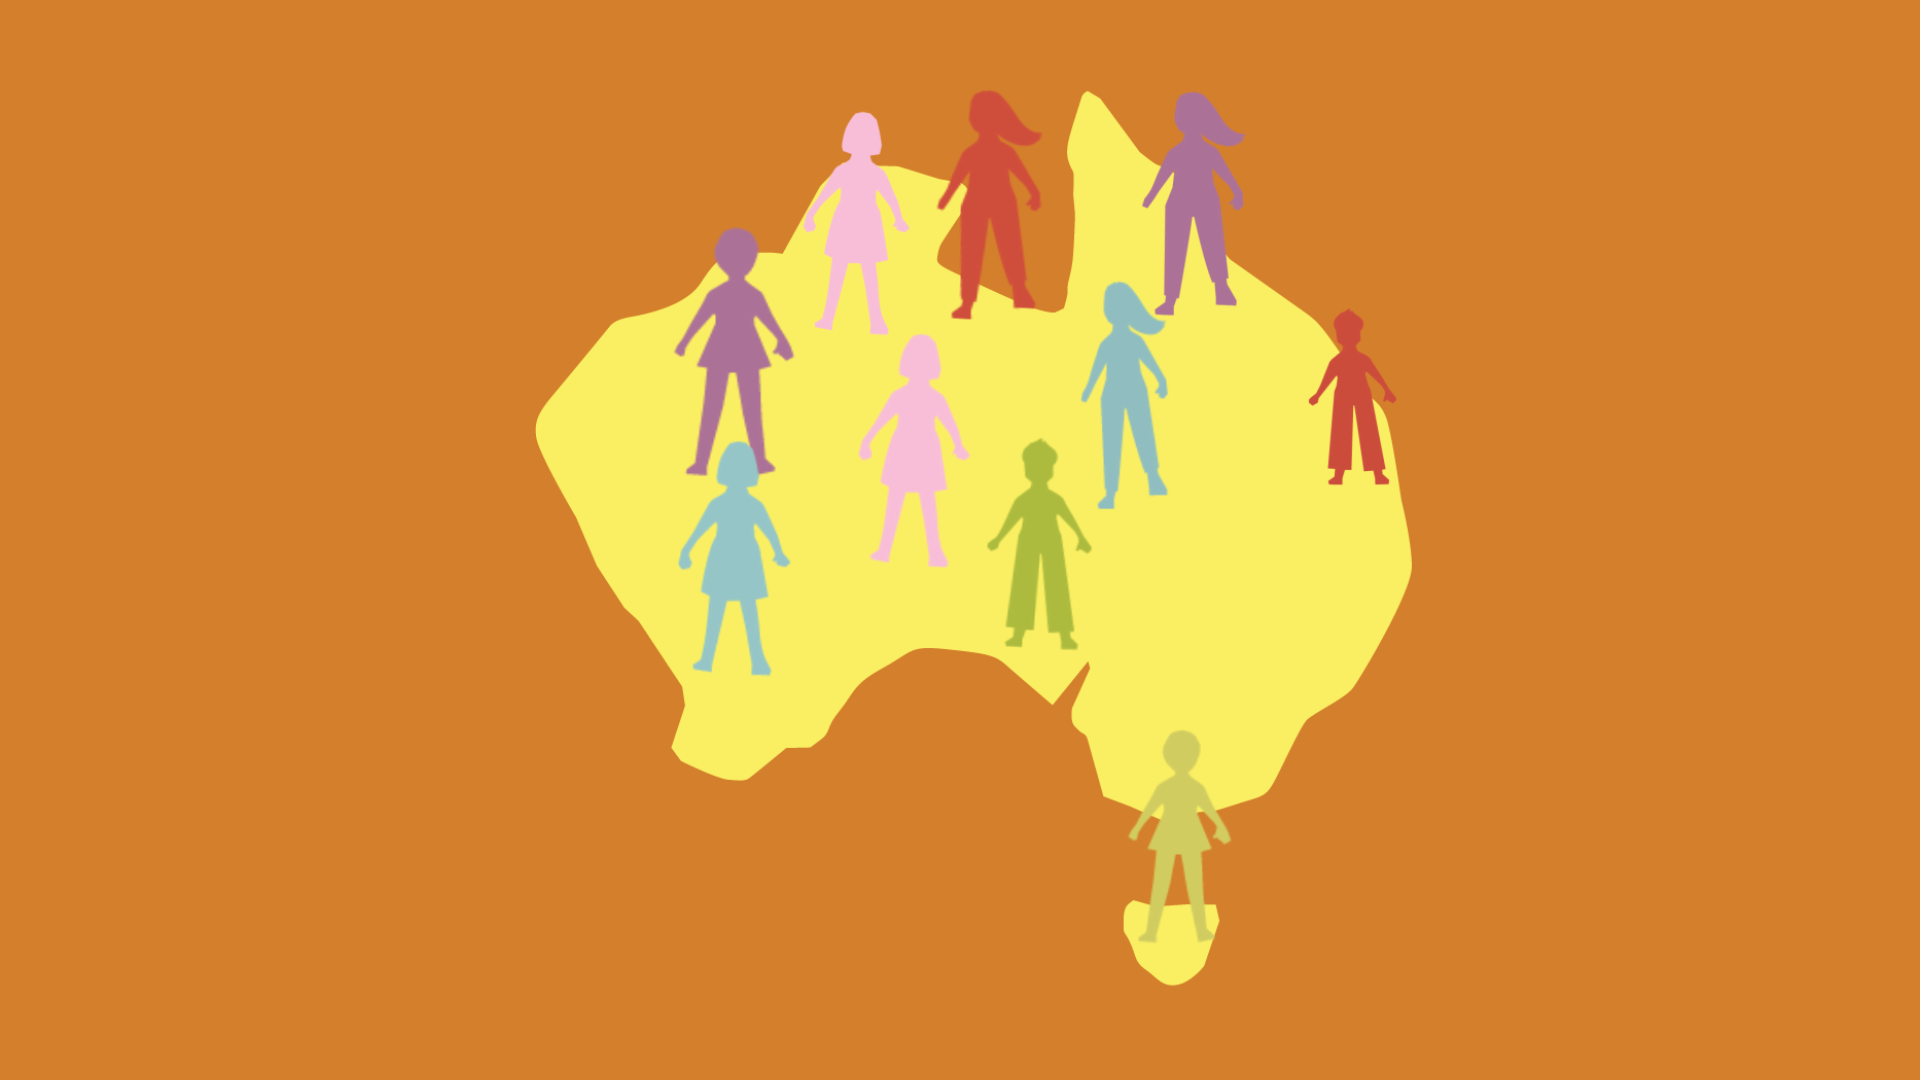 Australia on an orange background with colour people placed on top